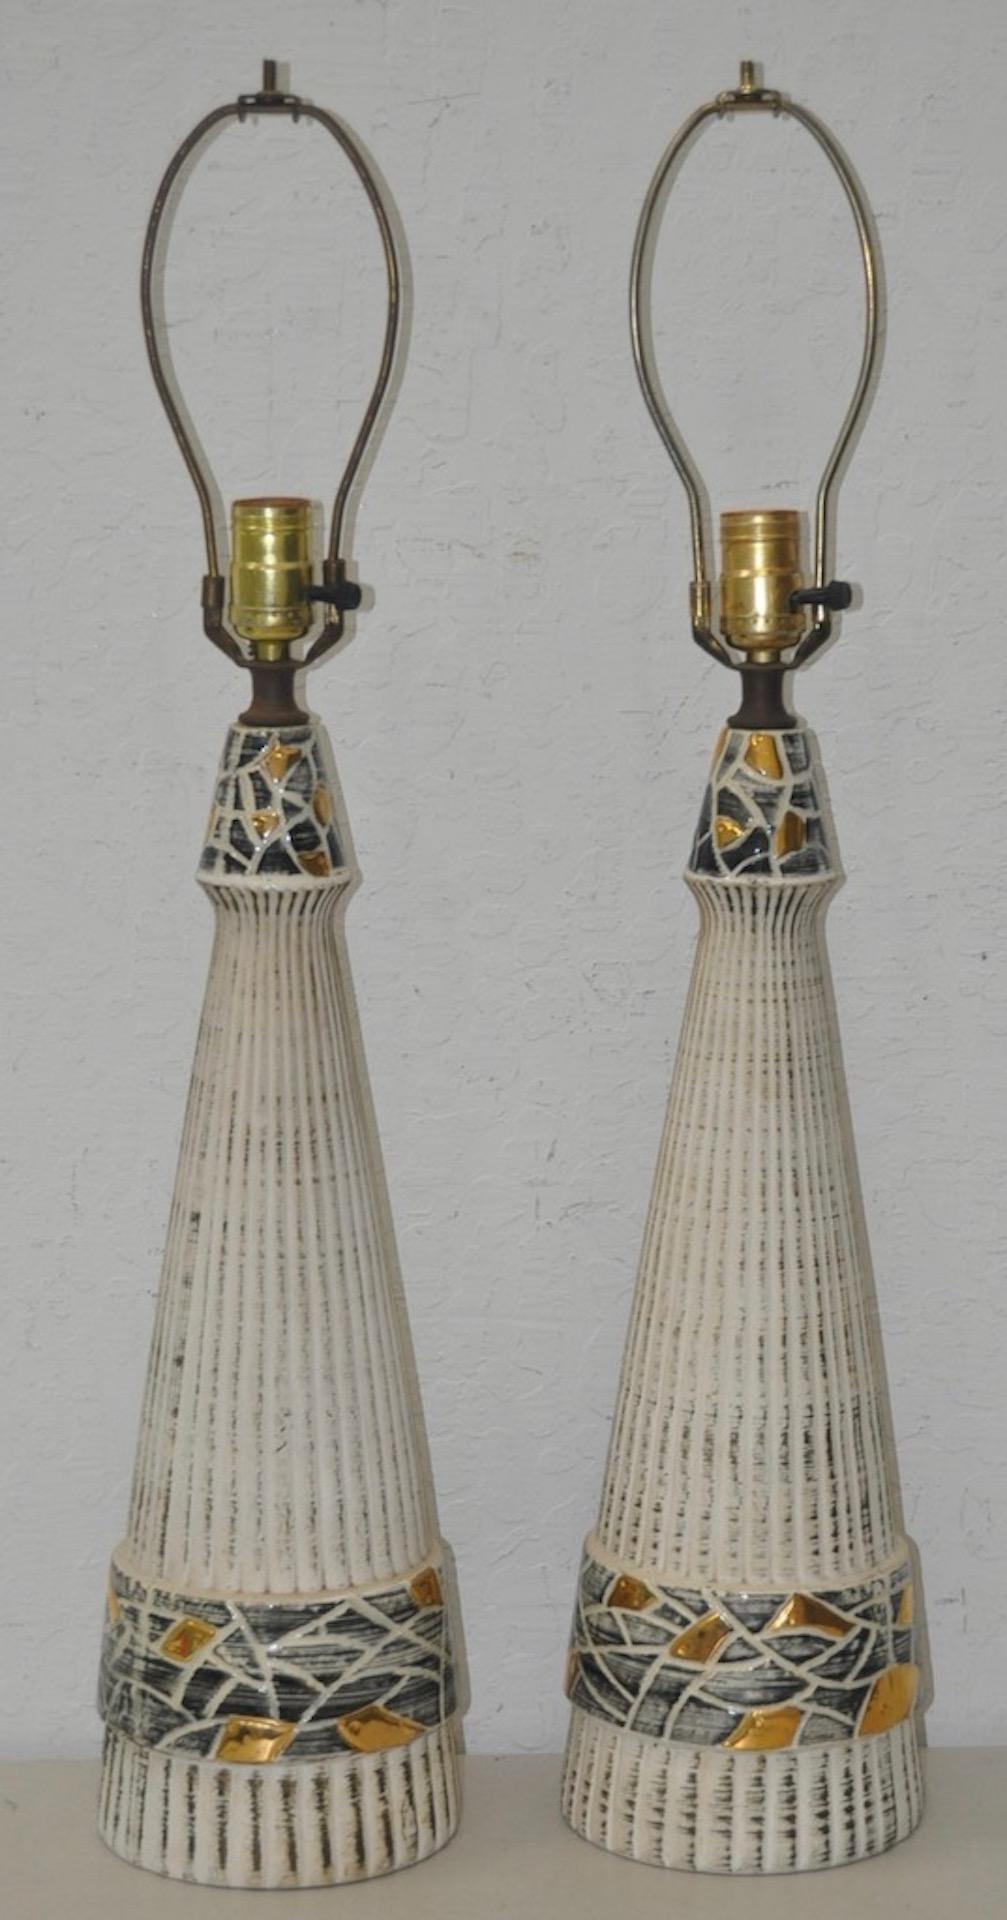 Other Pair of Mid-Century Modern Glazed Ceramic Table Lamps, circa 1950s